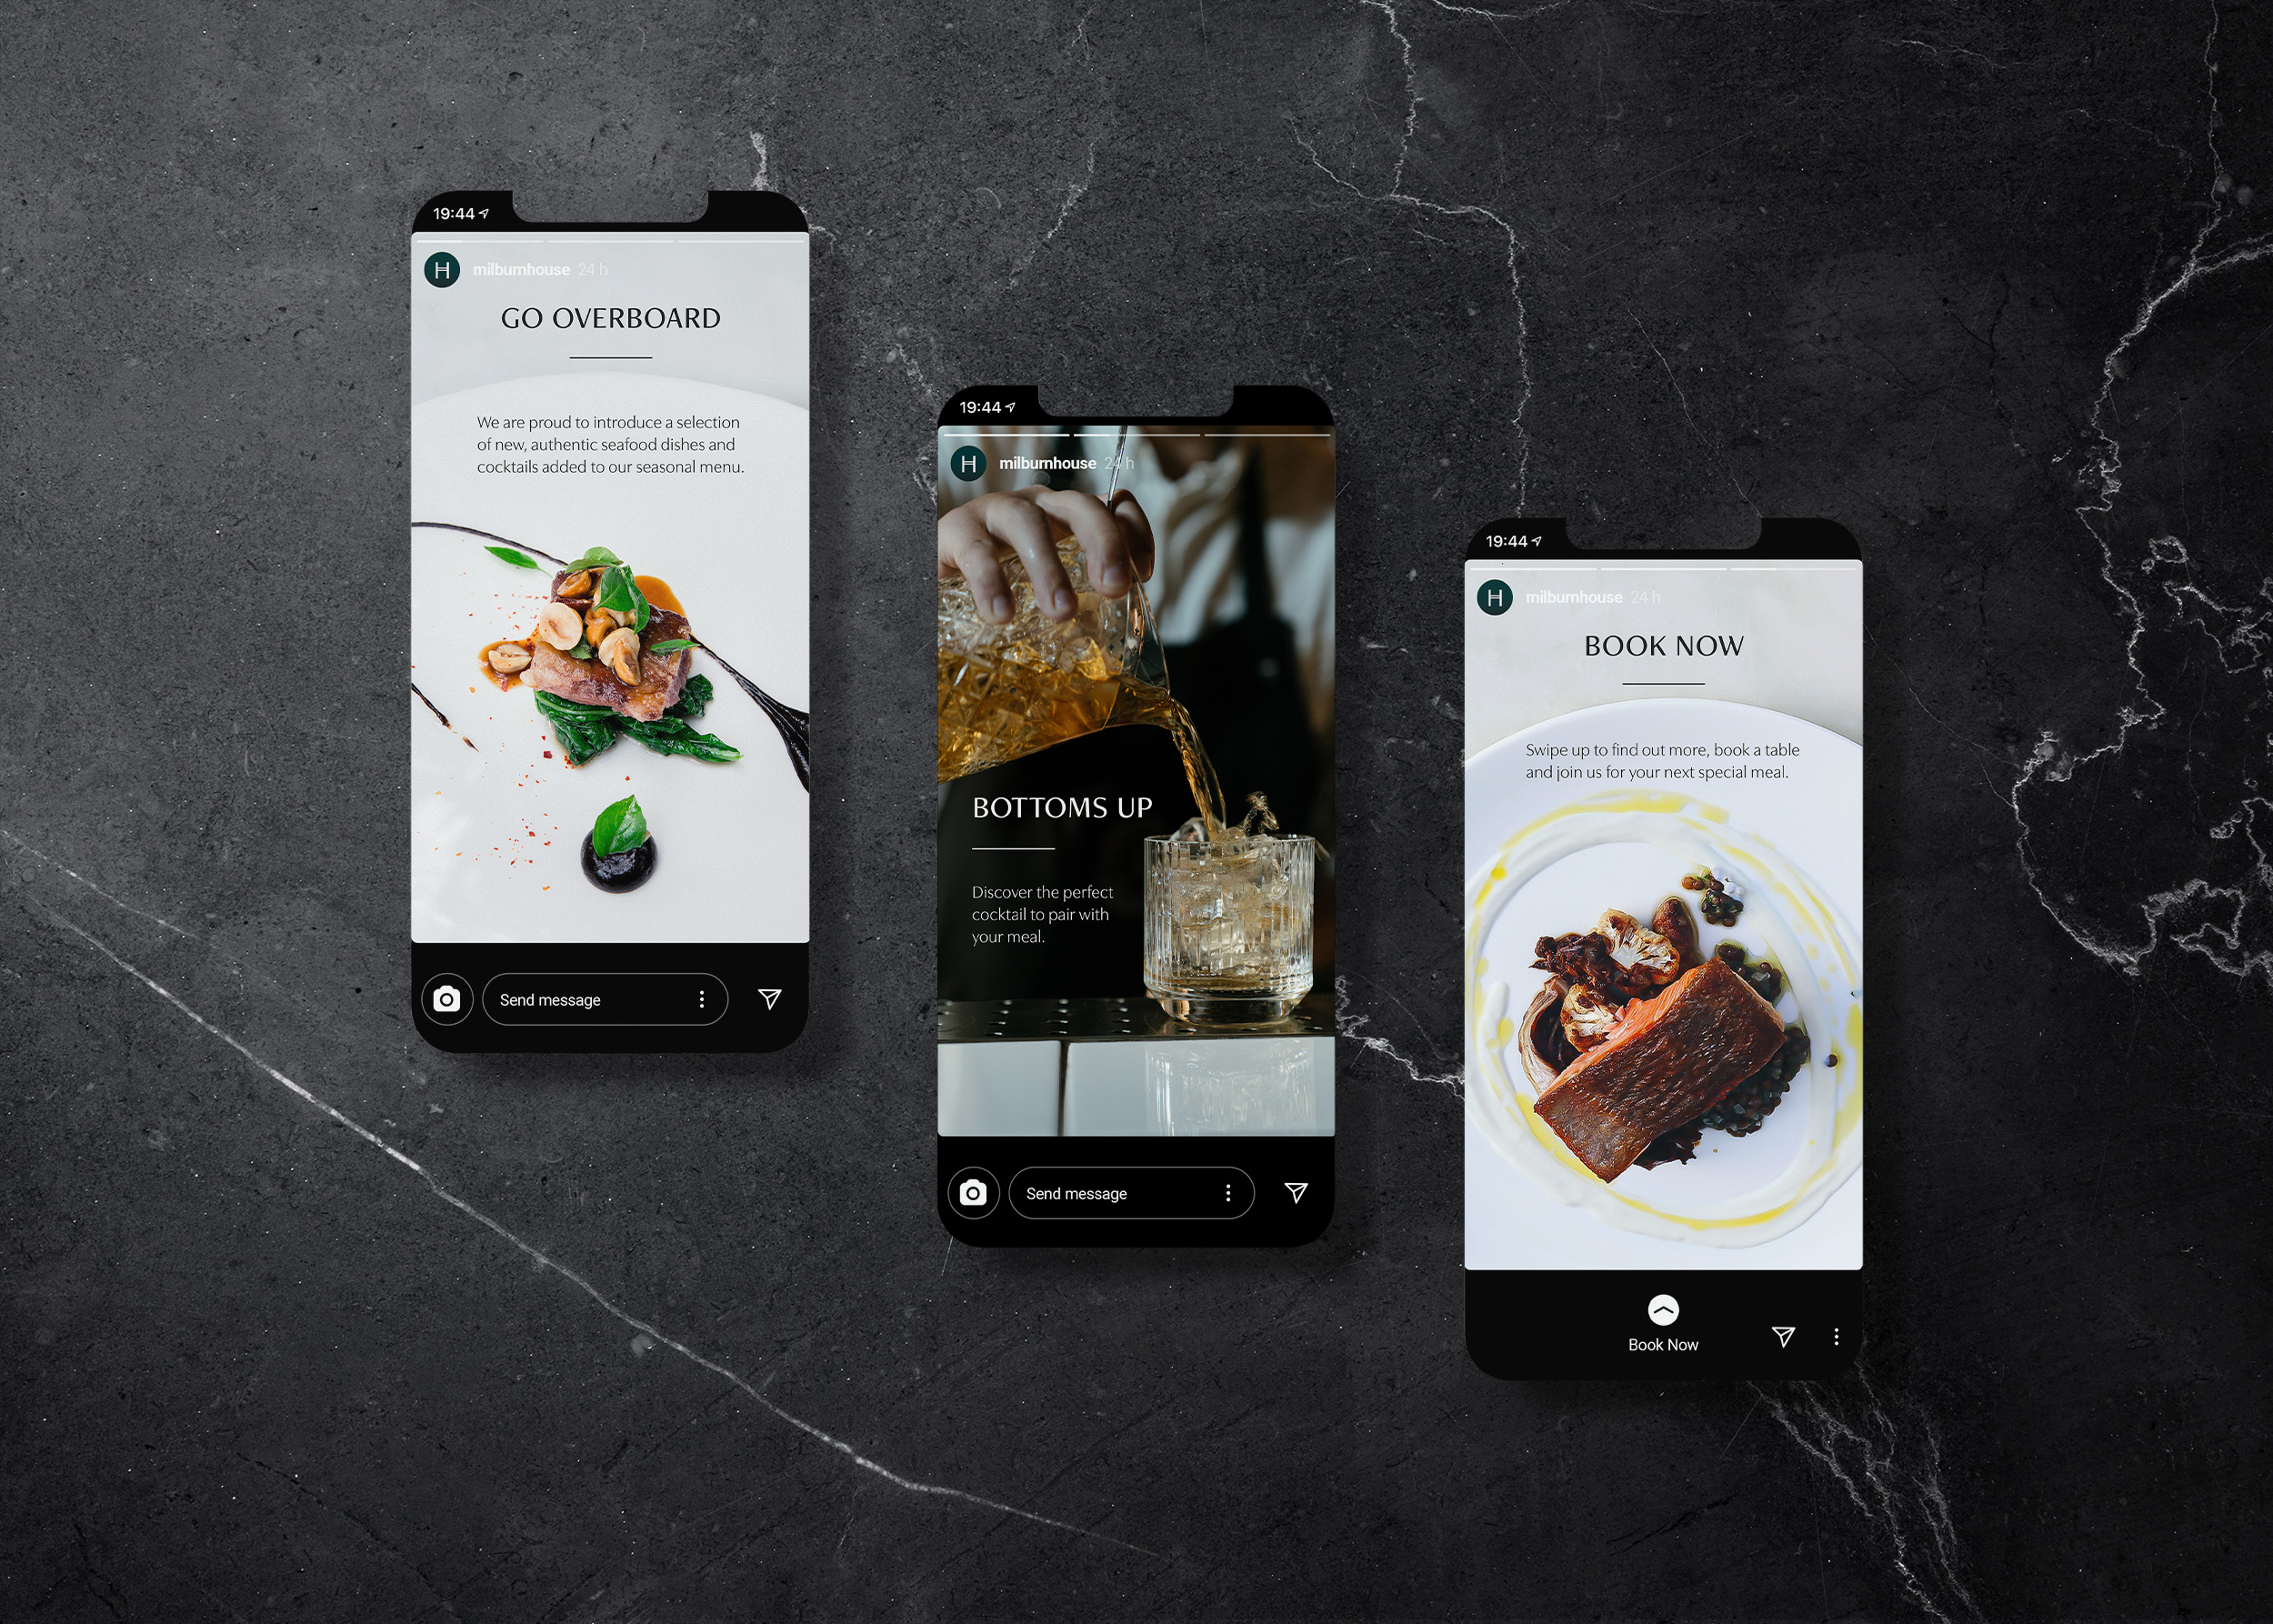 BA Graphic Communication work by Anna Taganova showing a set of three Instagram stories for the Milburn House restaurant identity.